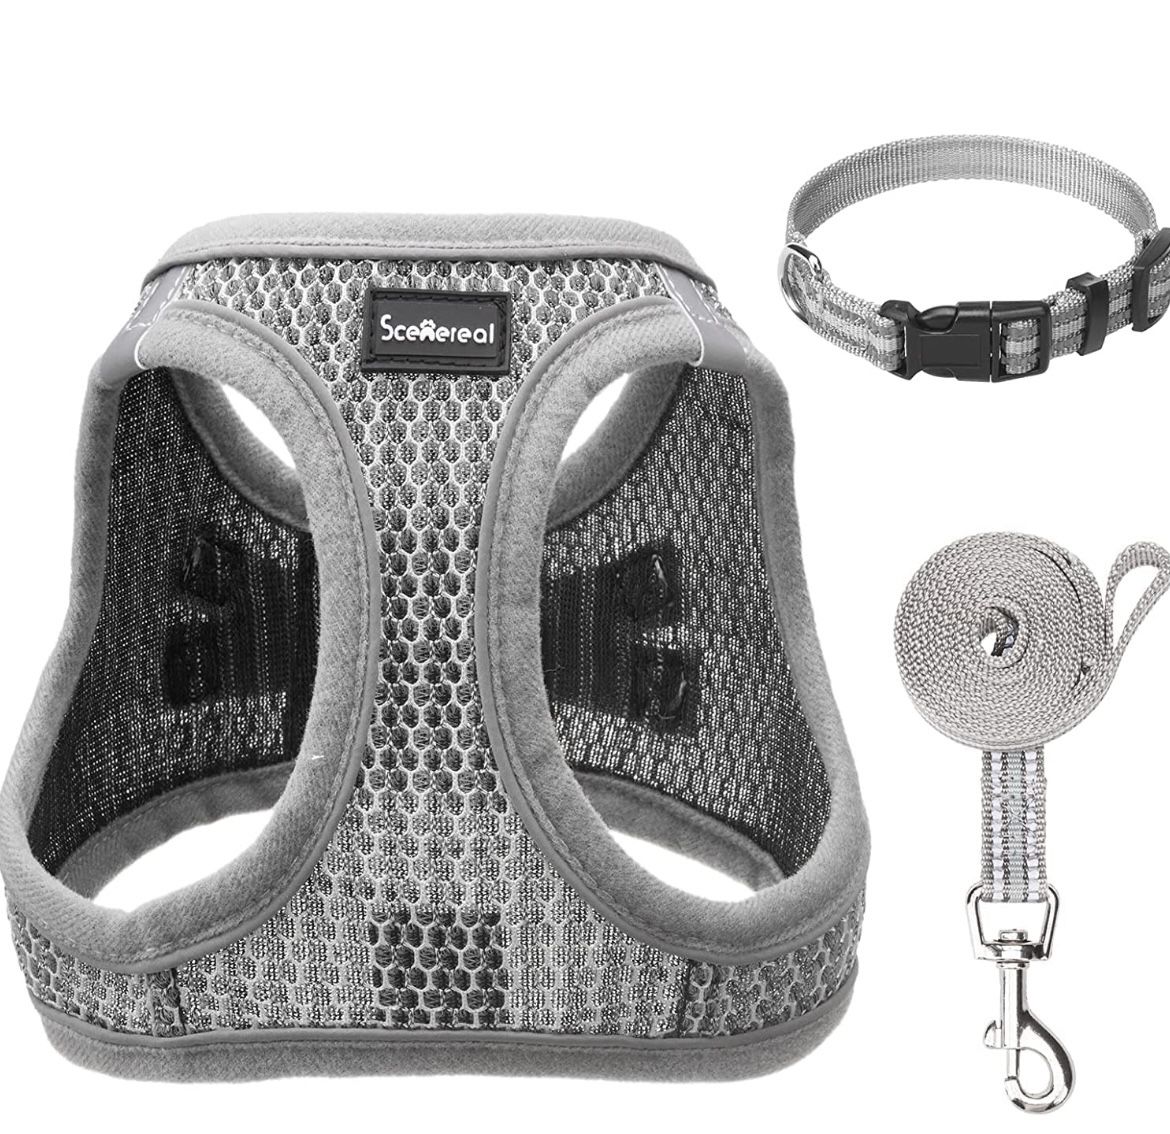 Step-in Dog Harness with Leash Collar Set - Reflective Dog Harnesses by Breathable Mesh Soft Padded Escape Proof Small Dog Vest Harness for Small Pupp